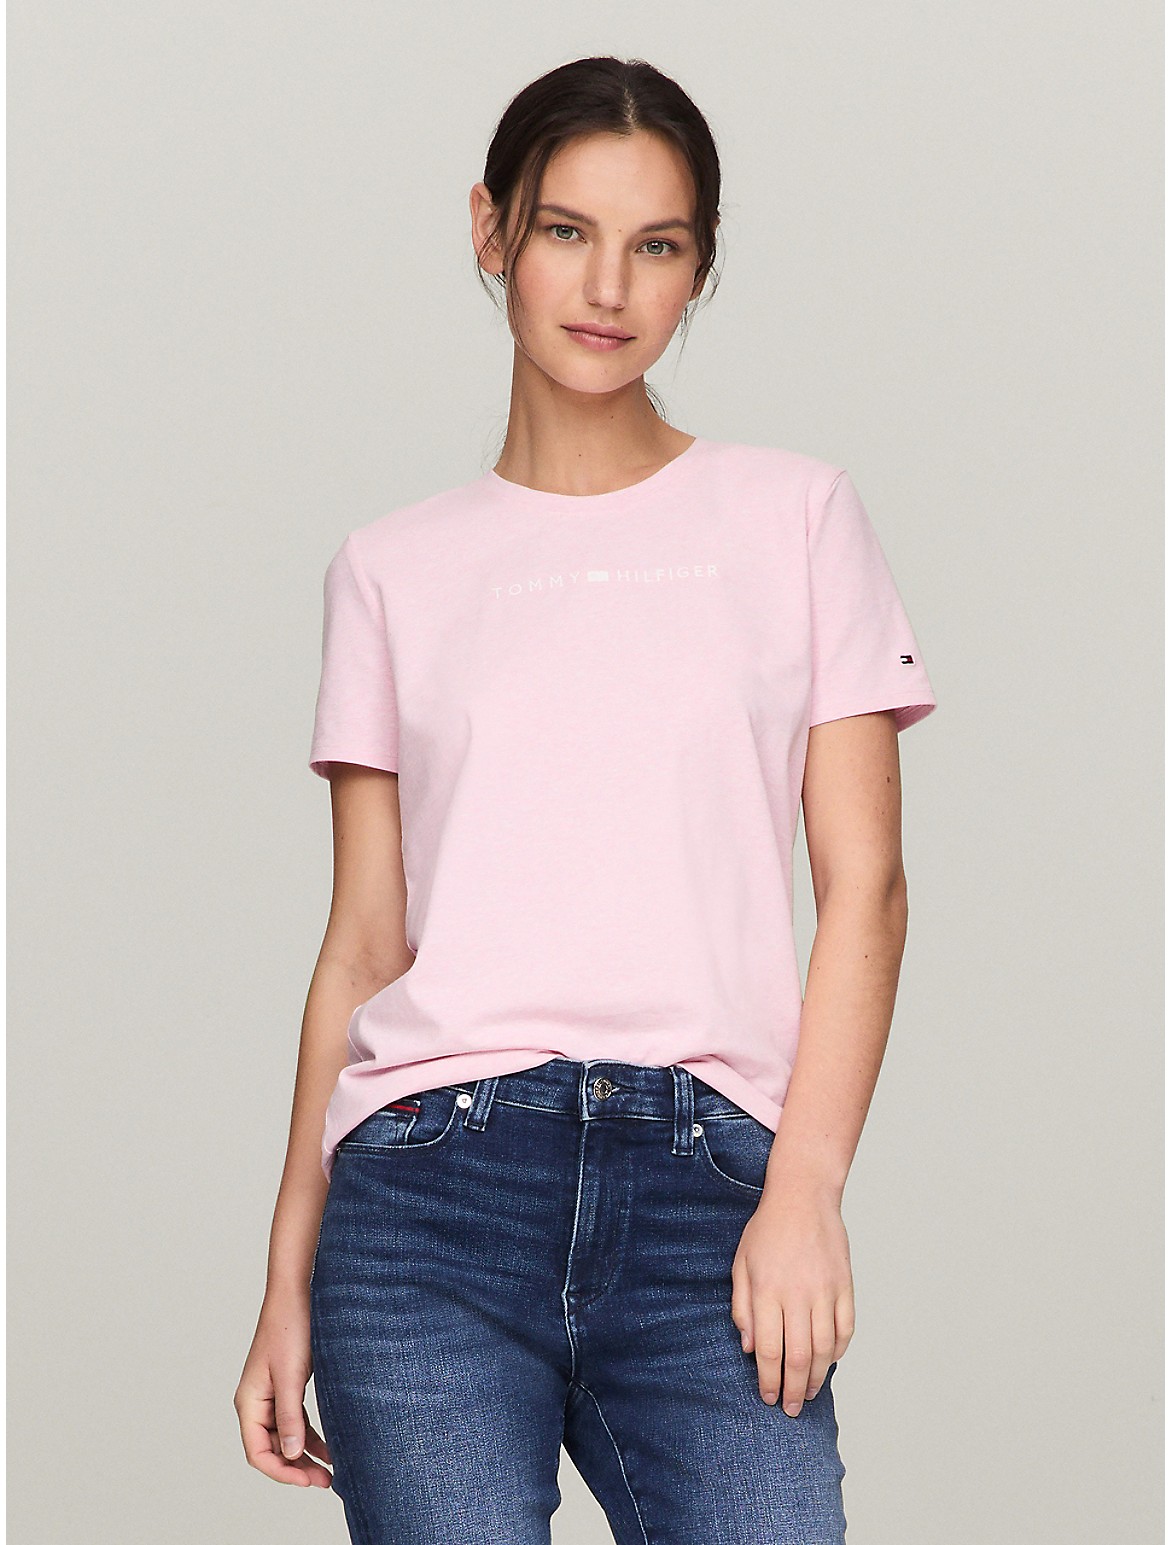 Tommy Hilfiger Women's Embroidered Logo T-Shirt